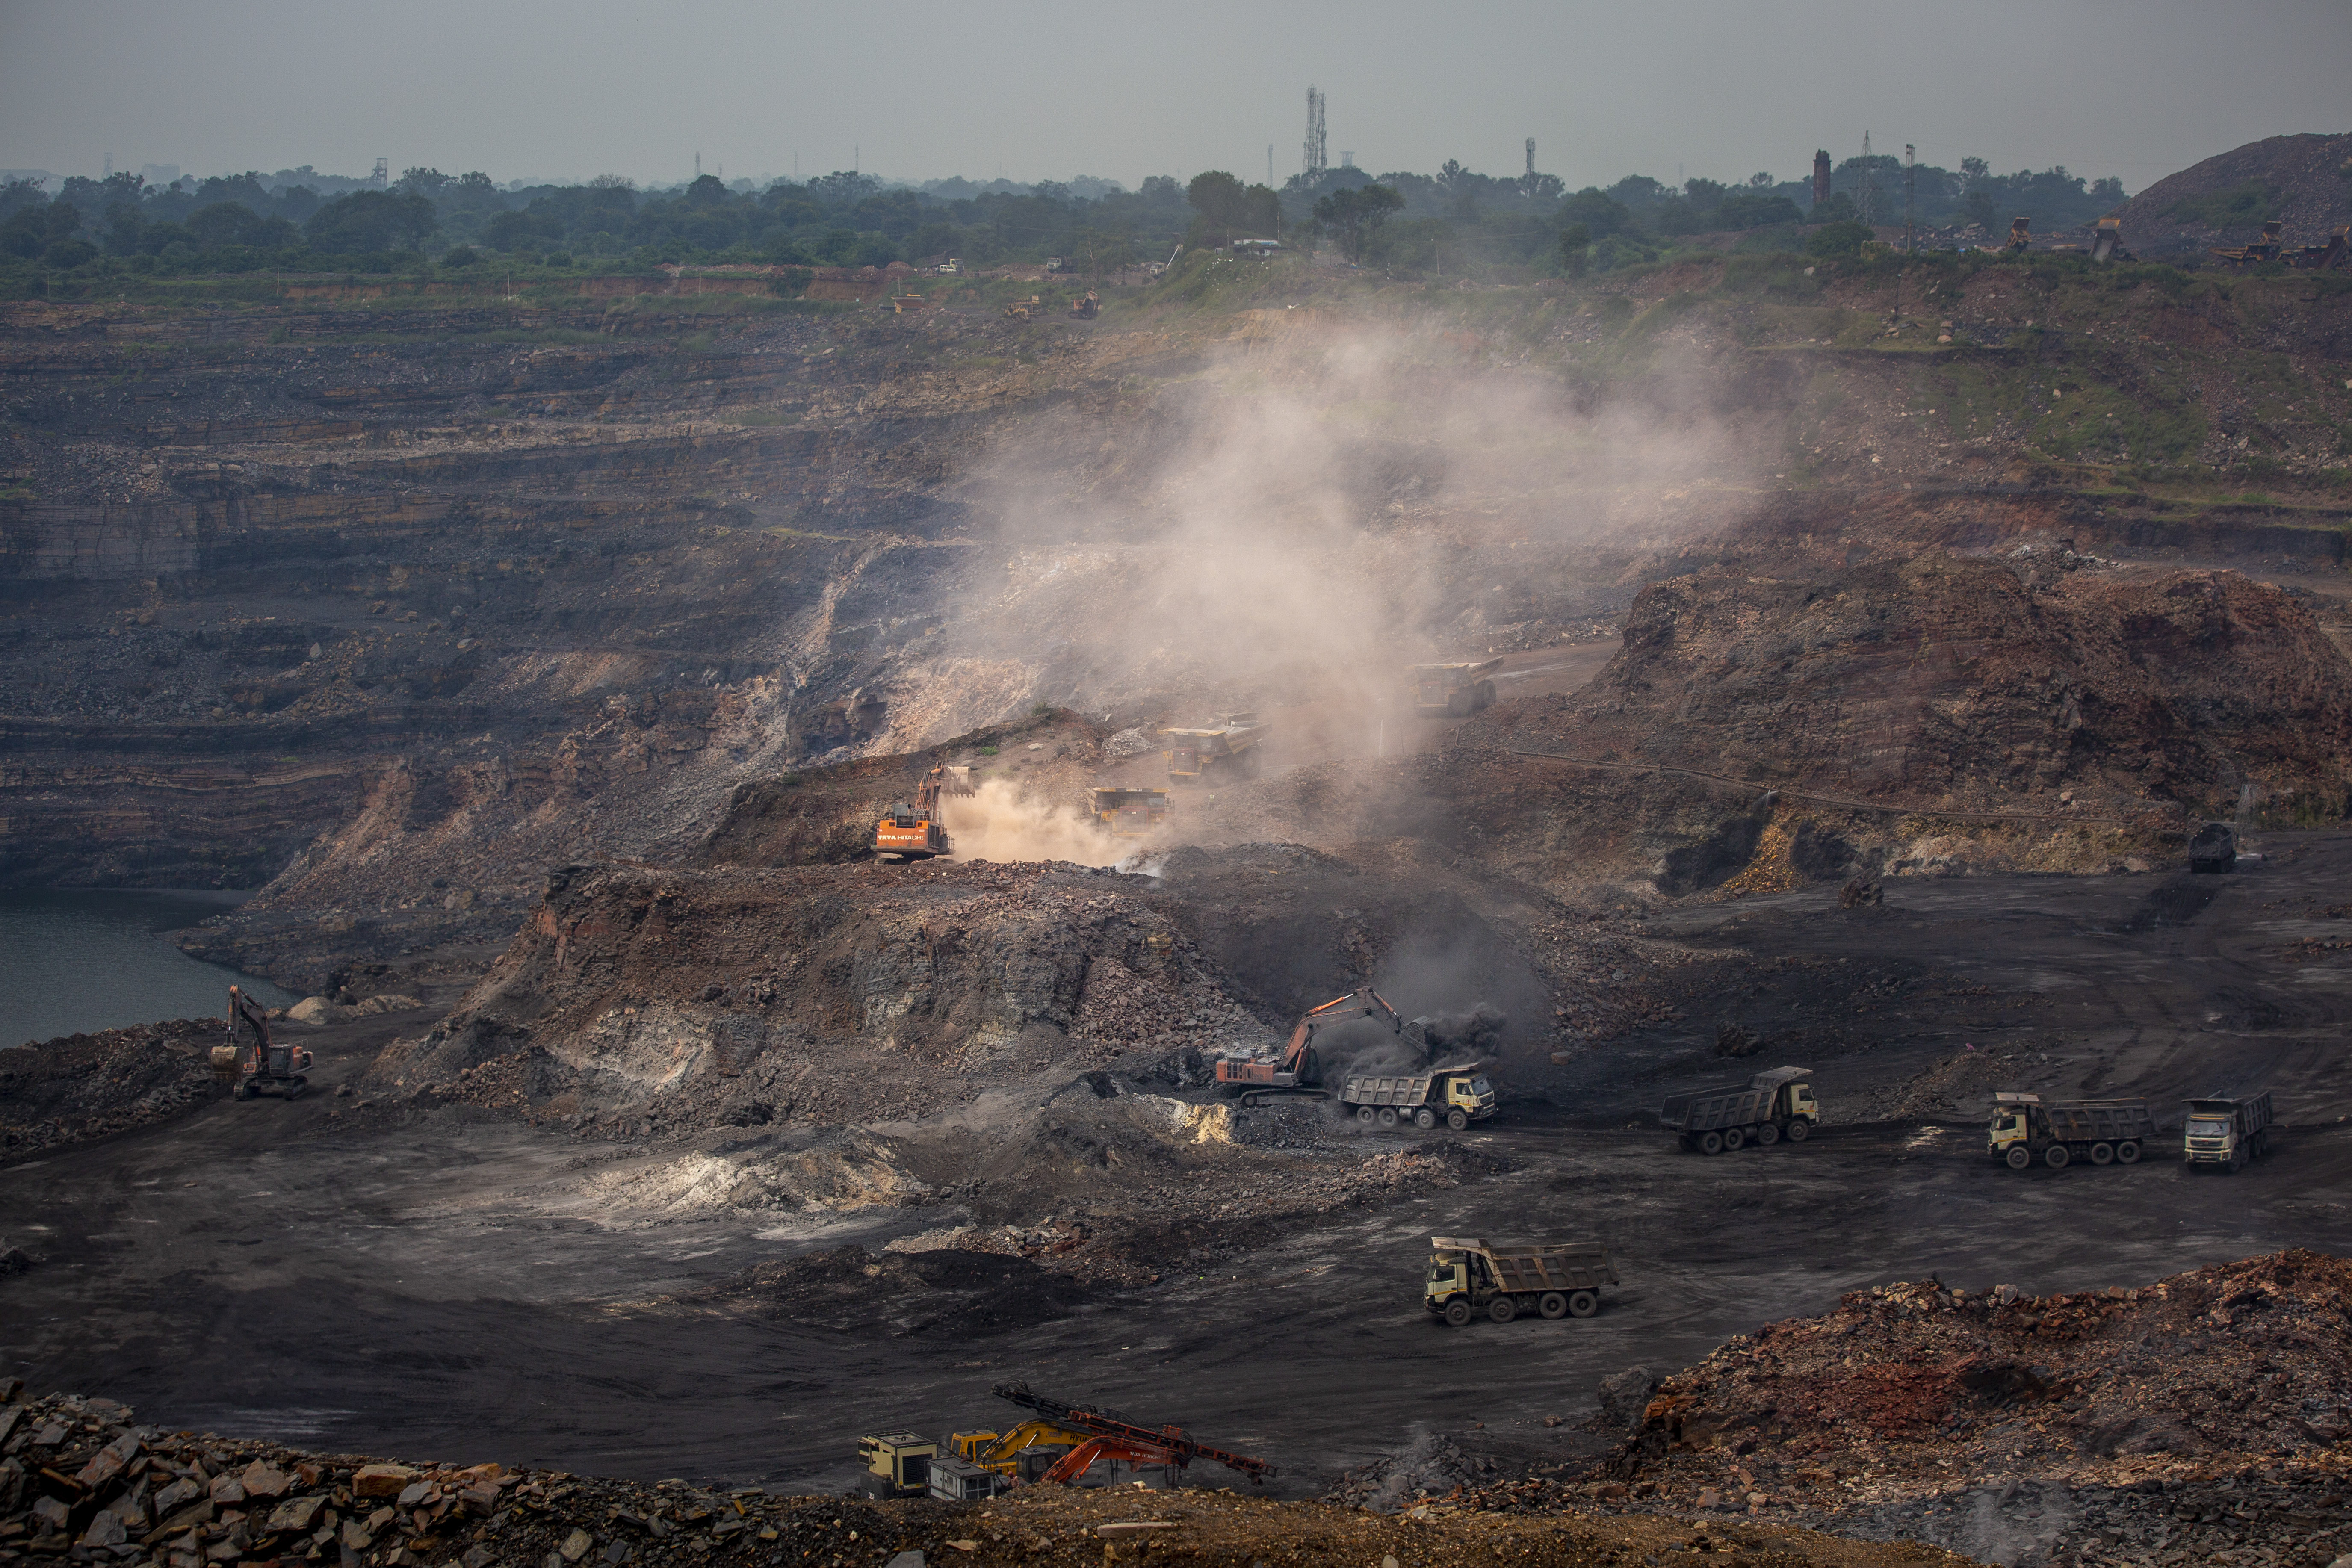 Mining is in progress at an open-cast mine near Dhanbad, an eastern Indian city in Jharkhand state, Friday, Sept. 24, 2021.